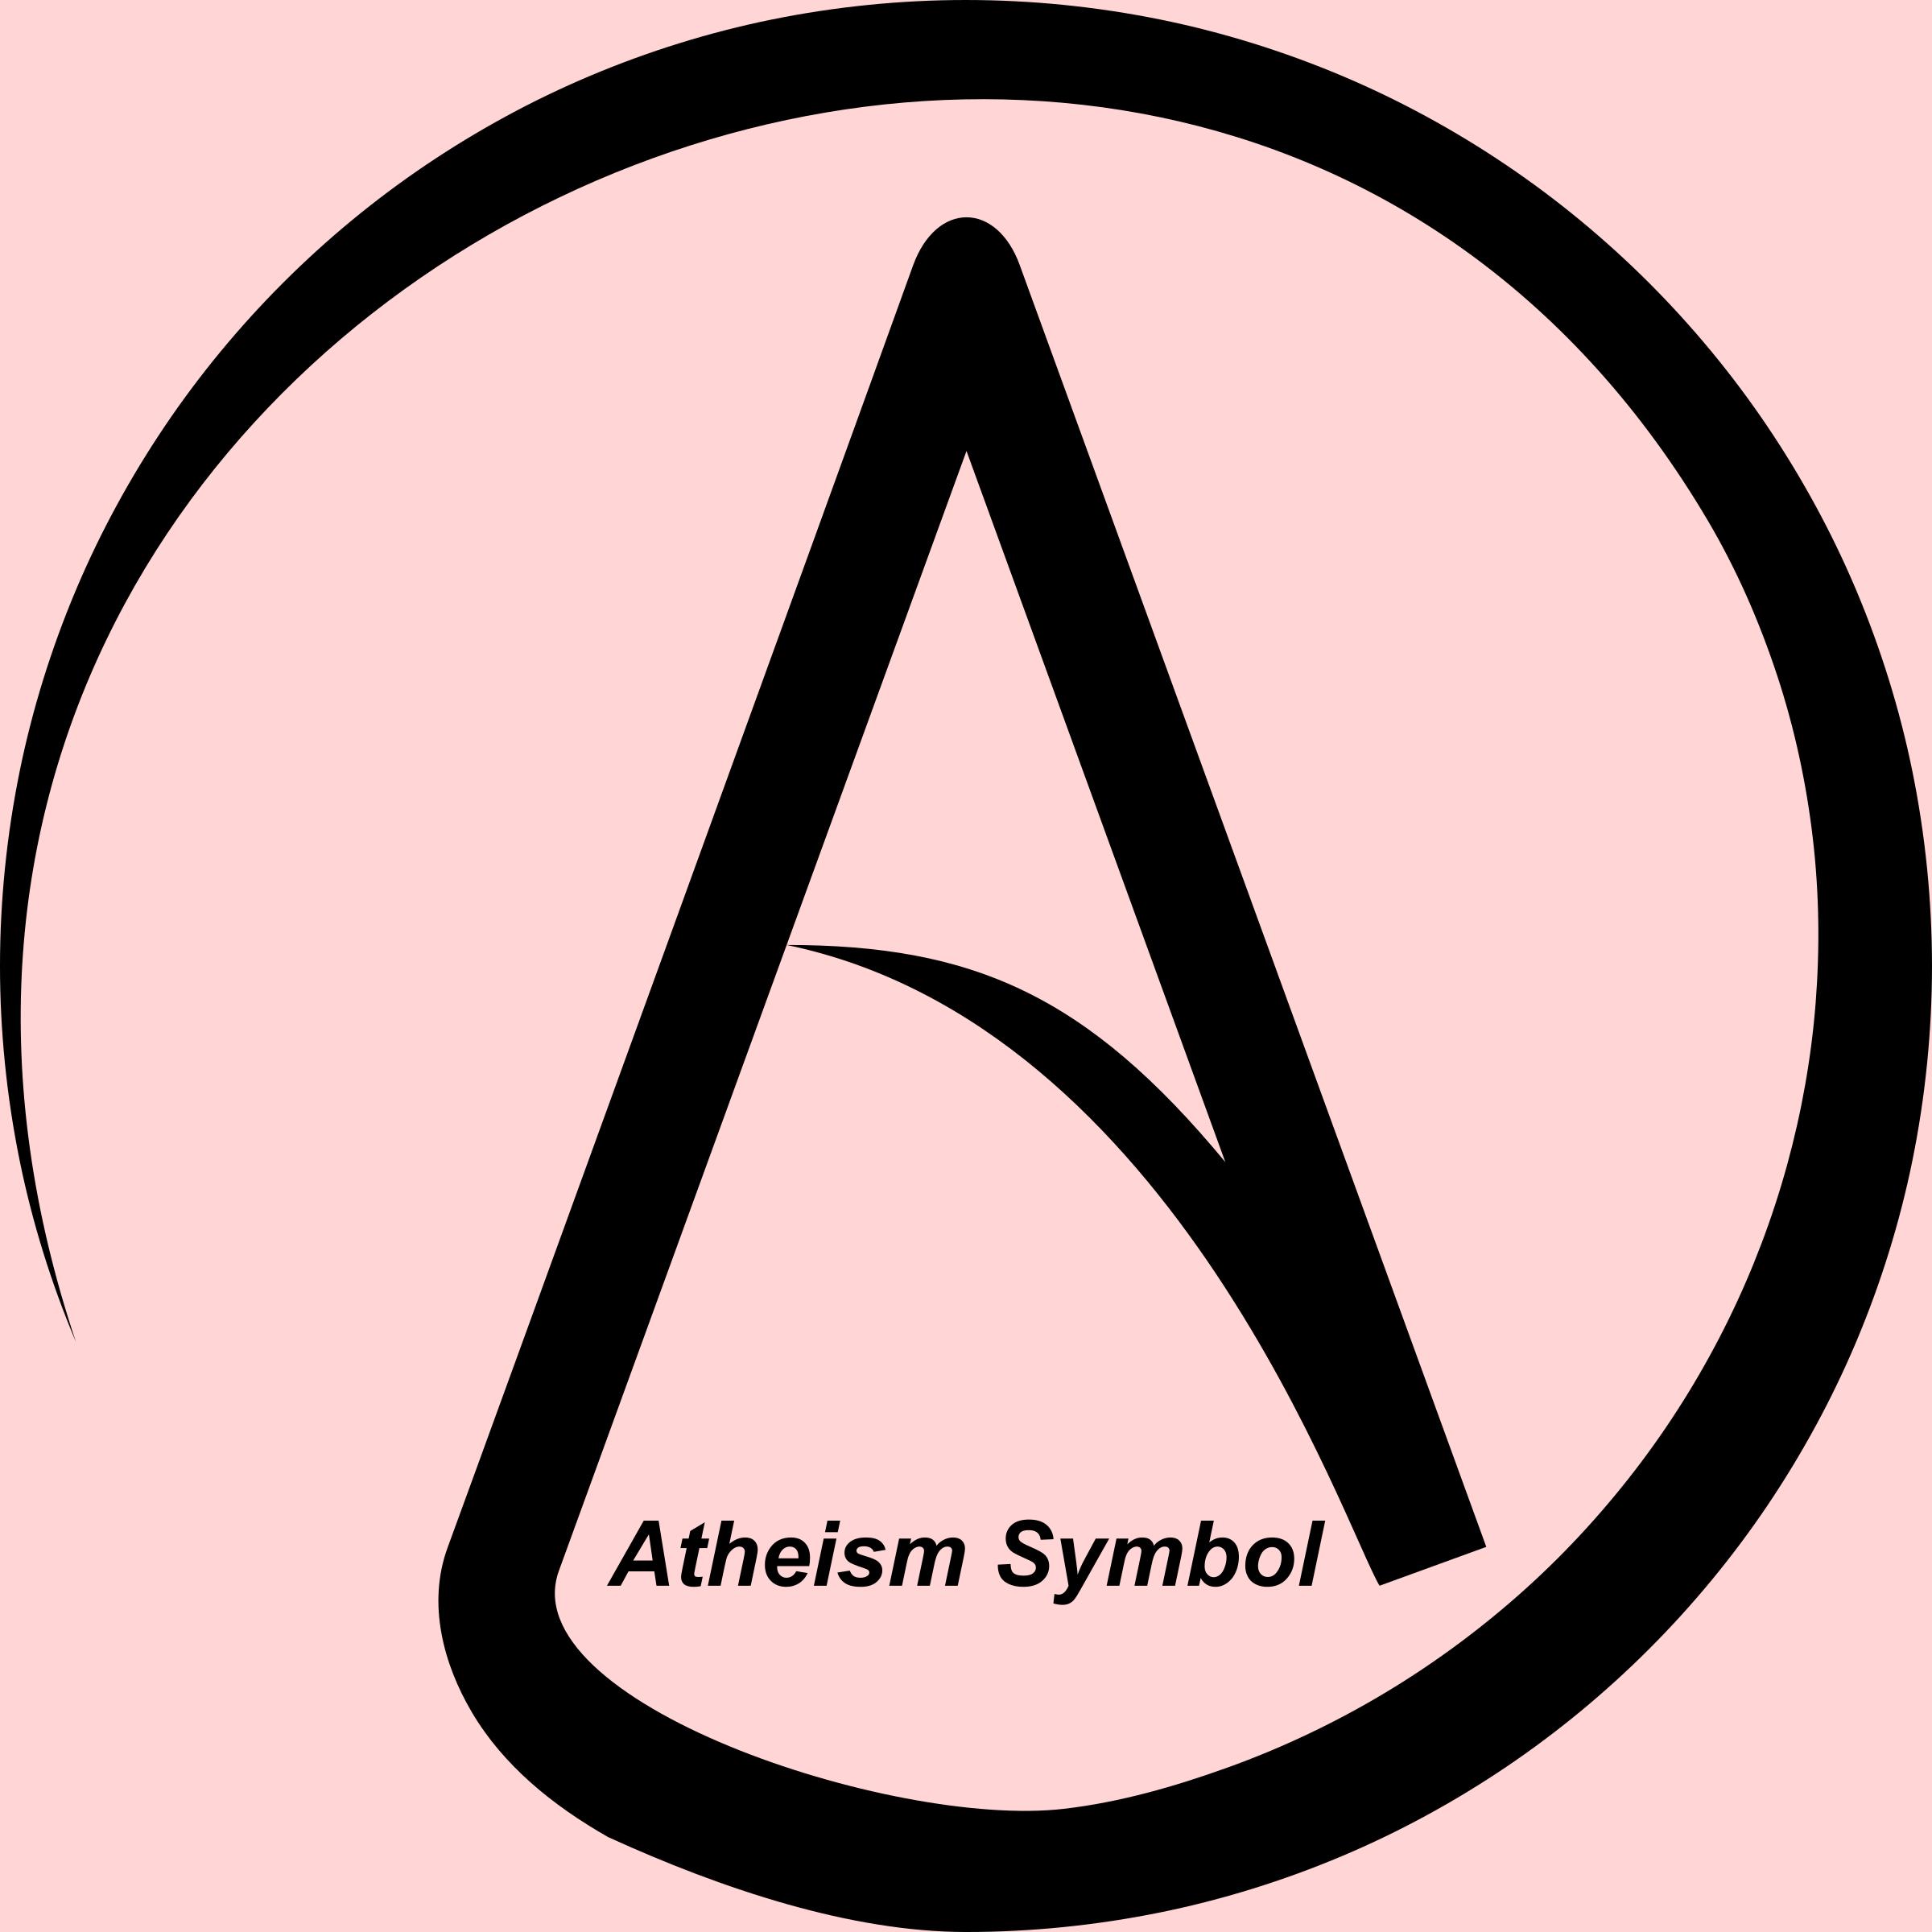 Atheism Symbol (A in Circle) PNG icons